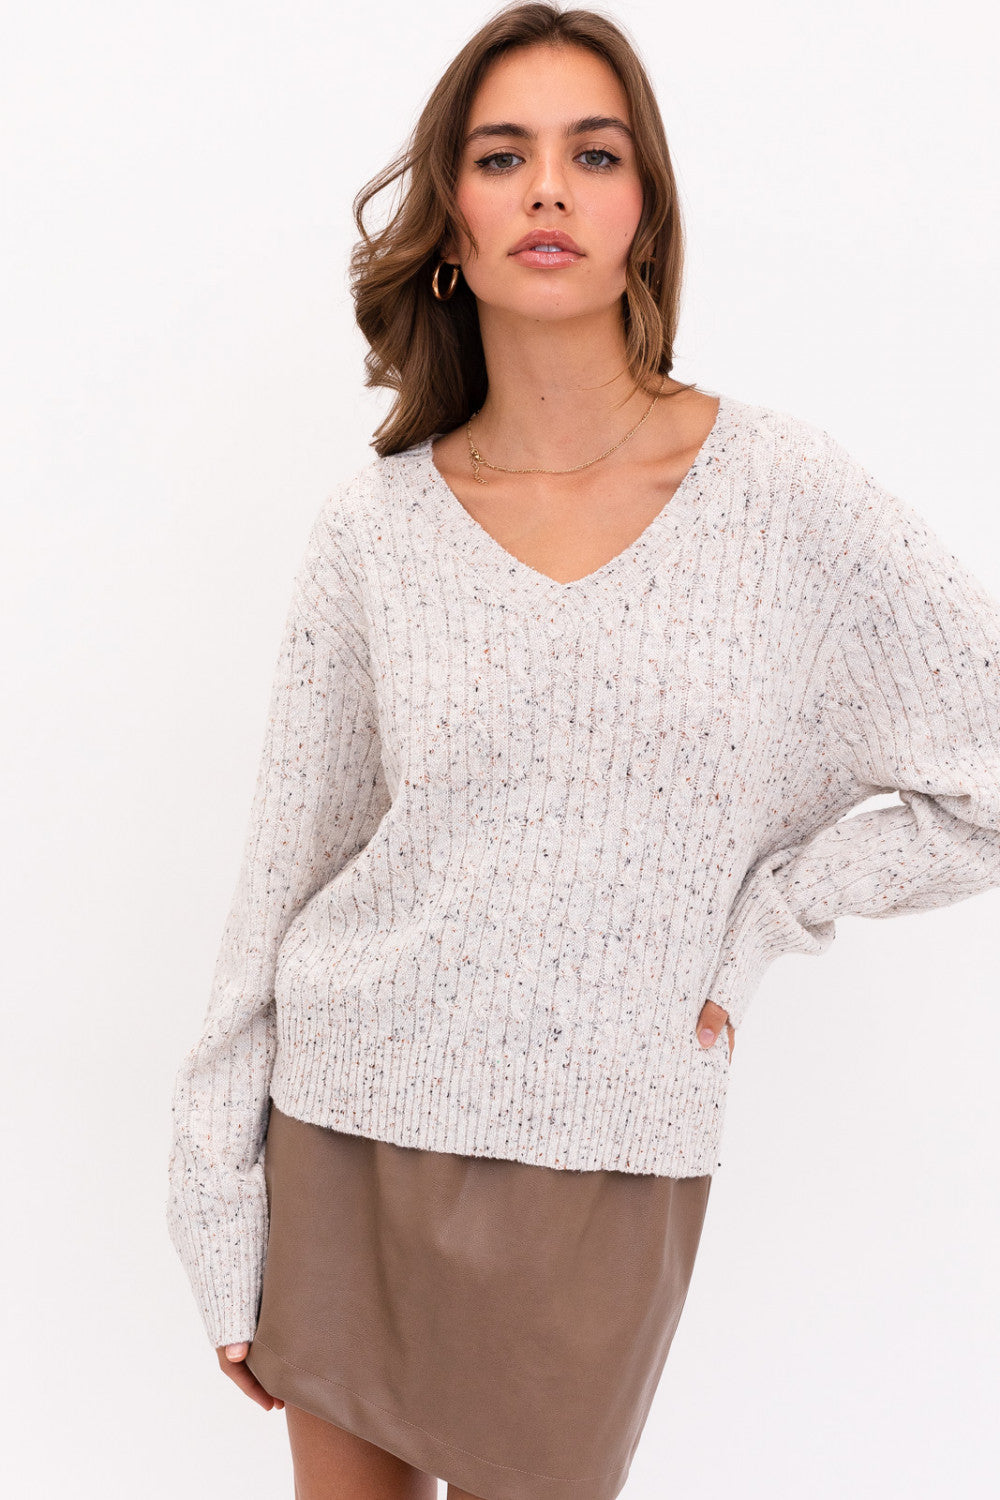 Oatmeal V-Neck Cable Knit Long Sleeve Sweater